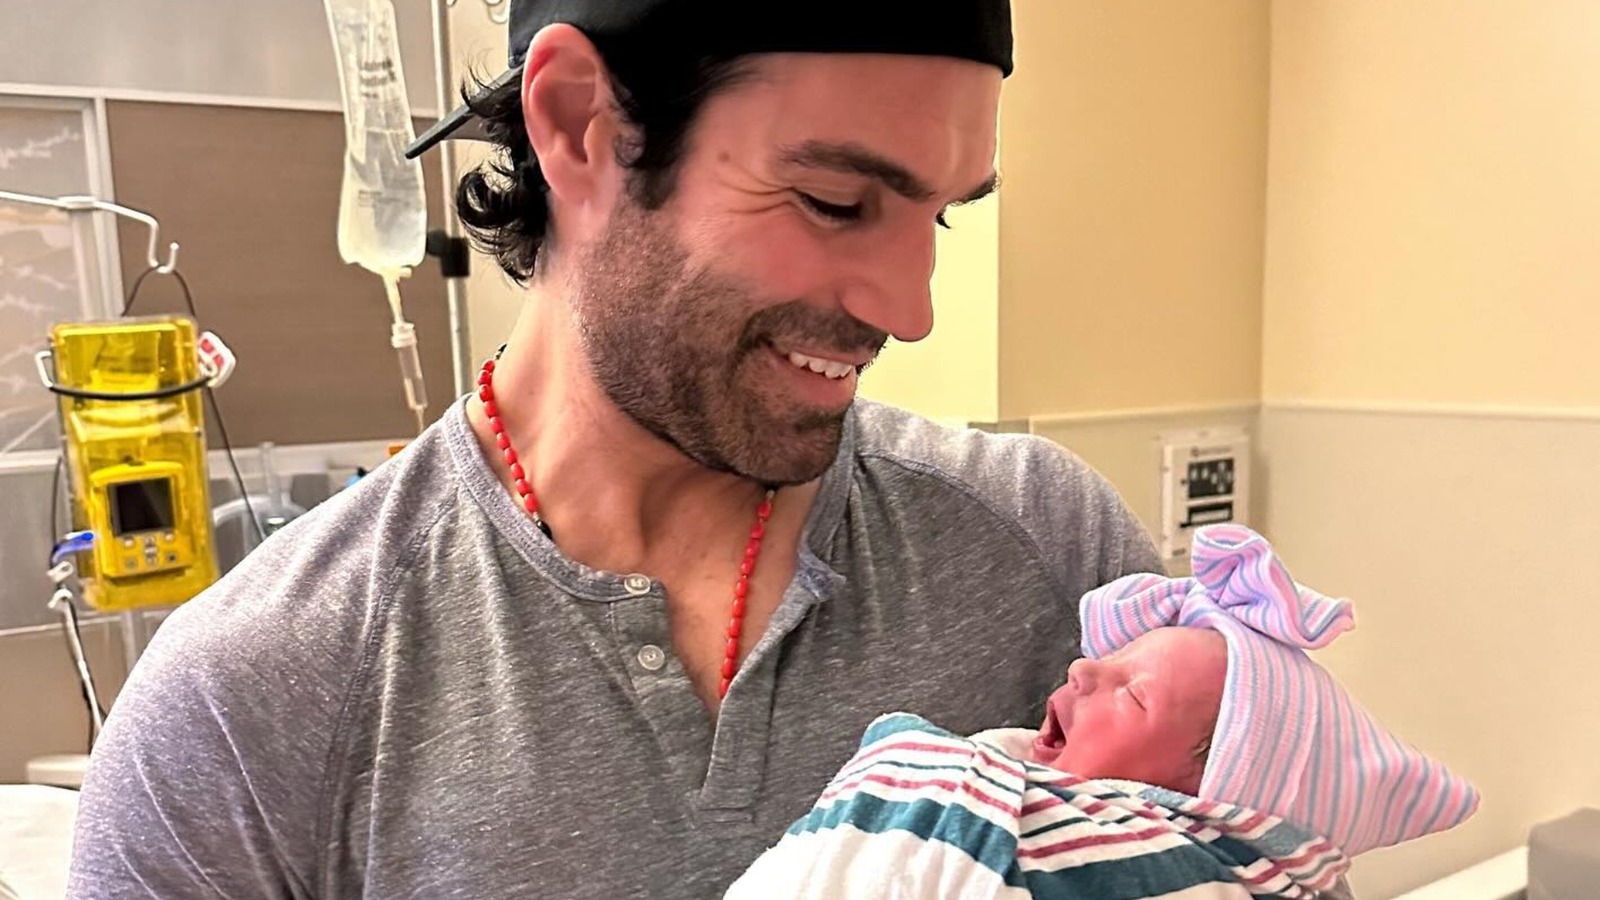 Y&R Alum Jordi Vilasuso Posts Heartbreaking Well being Information About His New child Daughter